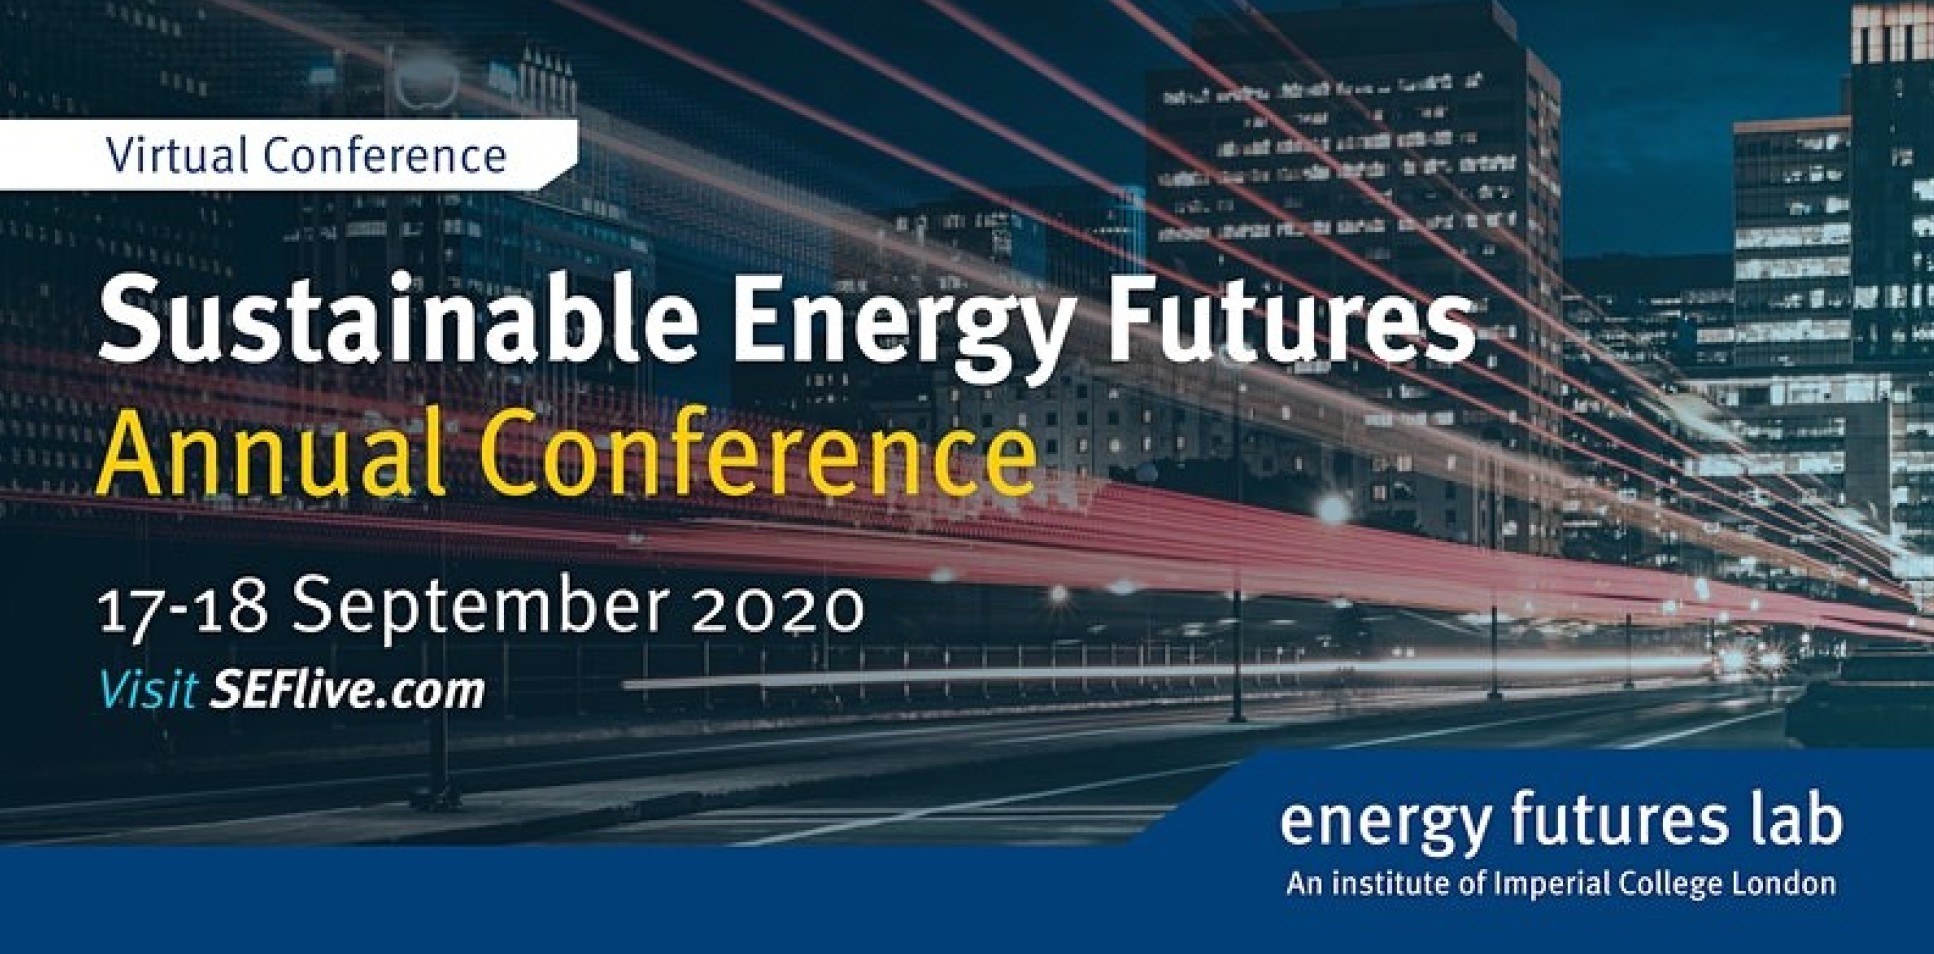 Sustainable energy futures annual conference banner